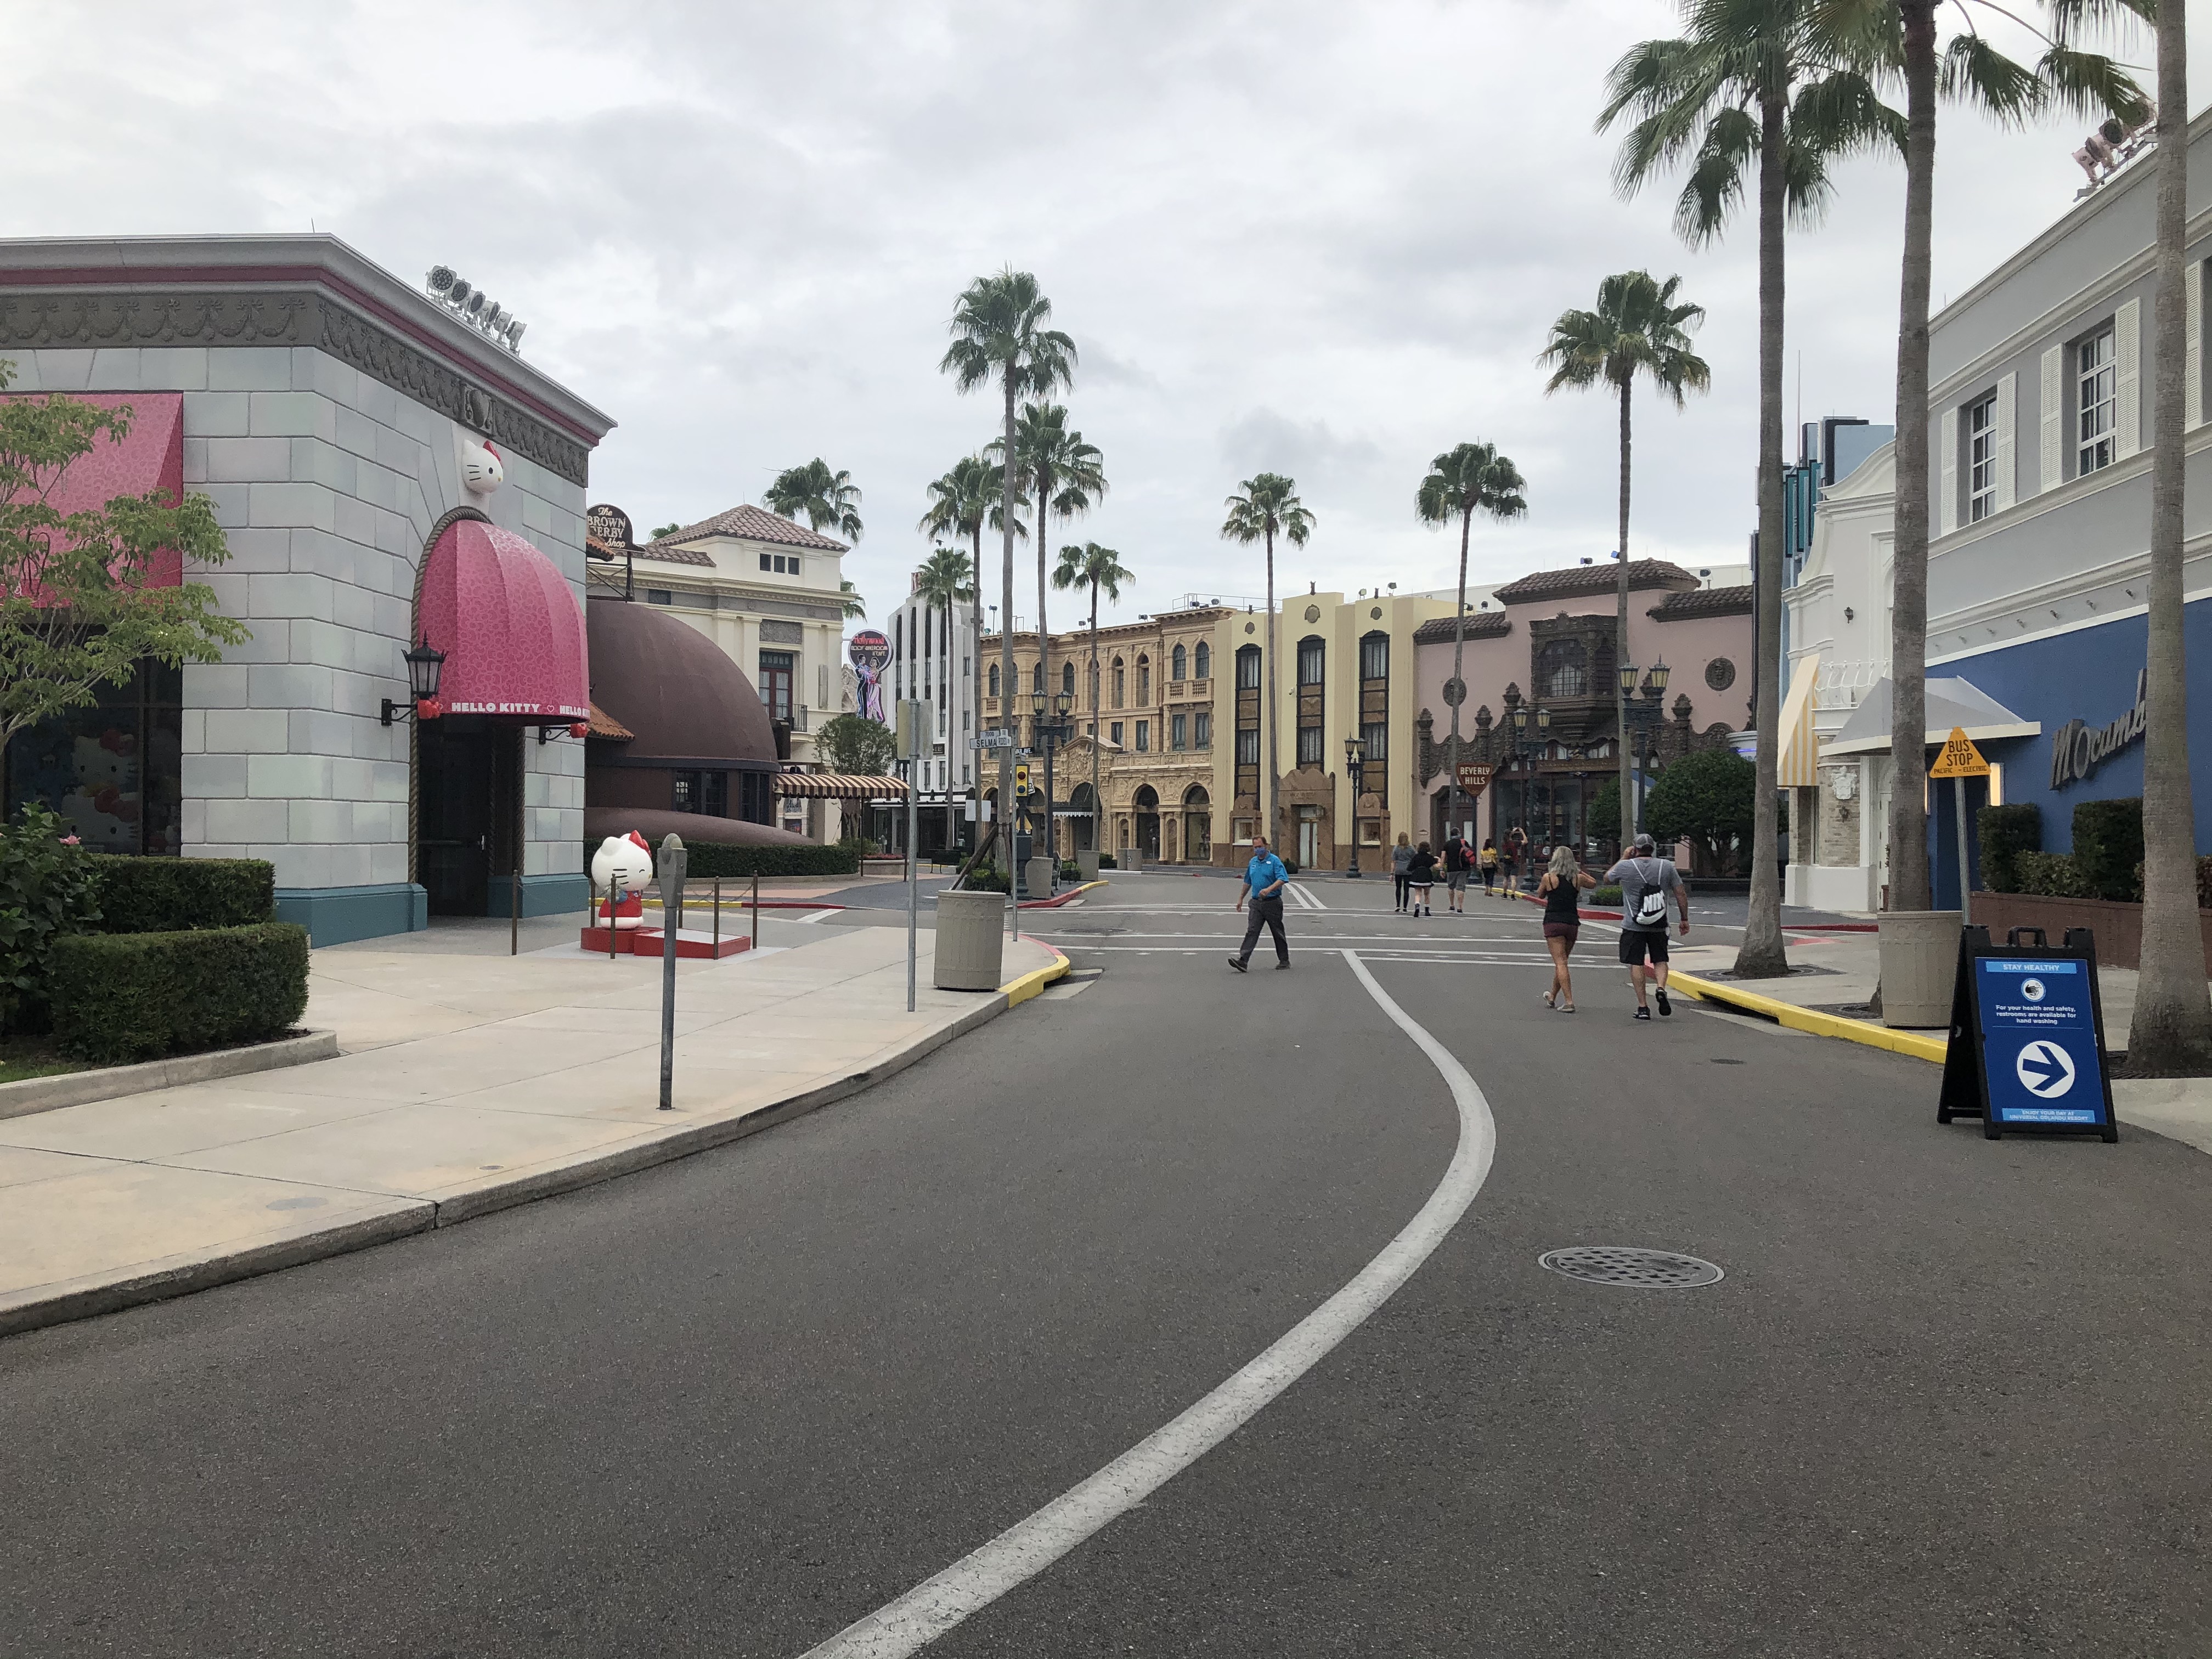 I Was One of the First People Back at Universal Orlando Resort. Here's